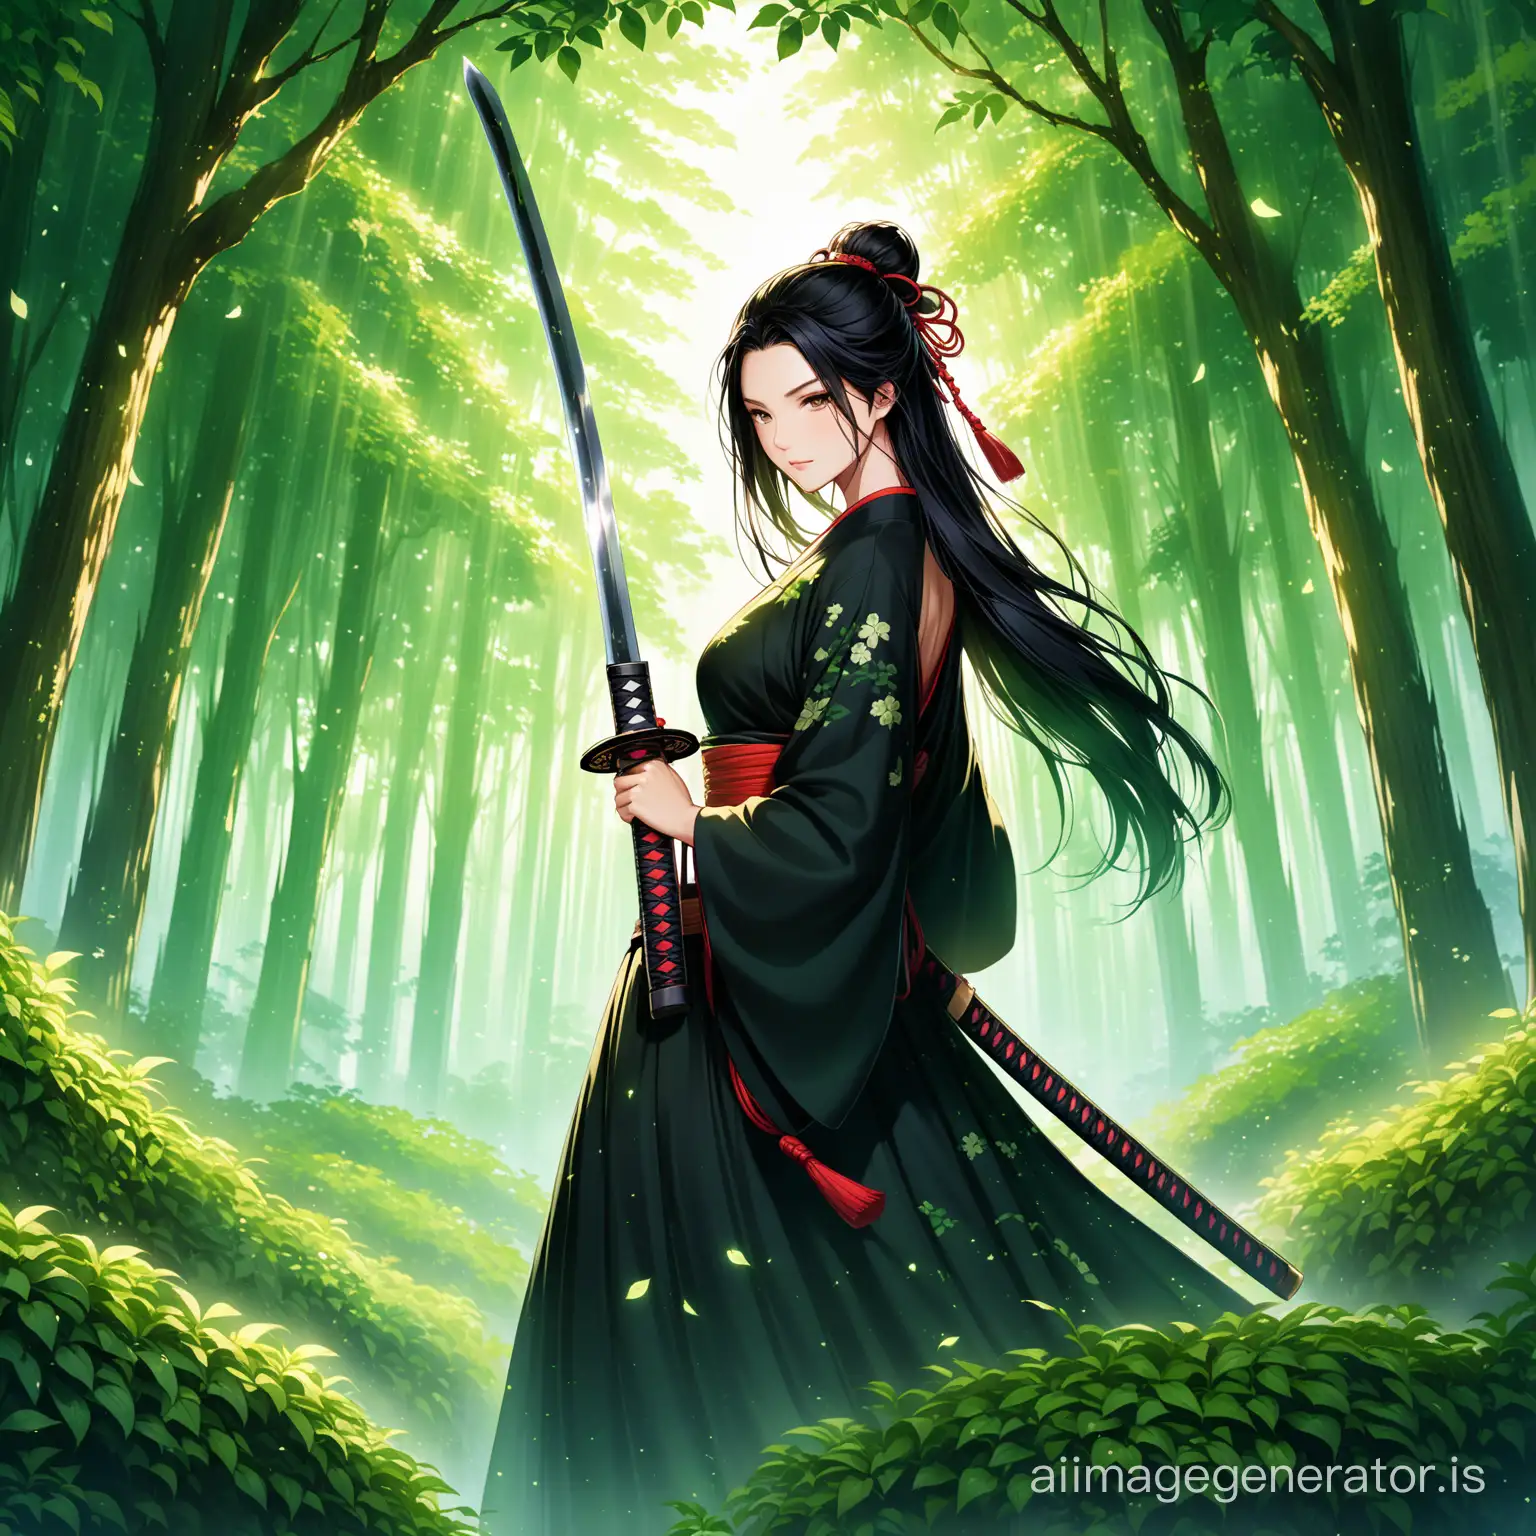 Imagine a striking female samurai, her form a mesmerizing fusion of nature's bounty and warrior's resolve. Clad in a sleek black Hanfu with an open back, she stands amidst a backdrop of verdant foliage, her attire accentuating her connection to both elegance and strength. Jet black hair cascades down her back like a curtain of shadows, framing features that radiate with an ethereal luminescence. Her skin, a delicate tapestry of human and plant, glows with the vitality of the earth itself, while her eyes shimmer with an ancient wisdom born of the forests. Adorned with intricate floral patterns, her attire exudes a sense of mystery and power, a testament to her symbiotic bond with the natural world. In her hand, she wields a katana forged from enchanted wood, its blade gleaming with a supernatural energy. Set her amidst a tranquil garden or beneath the canopy of a sacred tree, where the serenity of her surroundings mirrors the strength and grace of her spirit. Capture the essence of her resilience, beauty, and harmony with nature in your depiction.